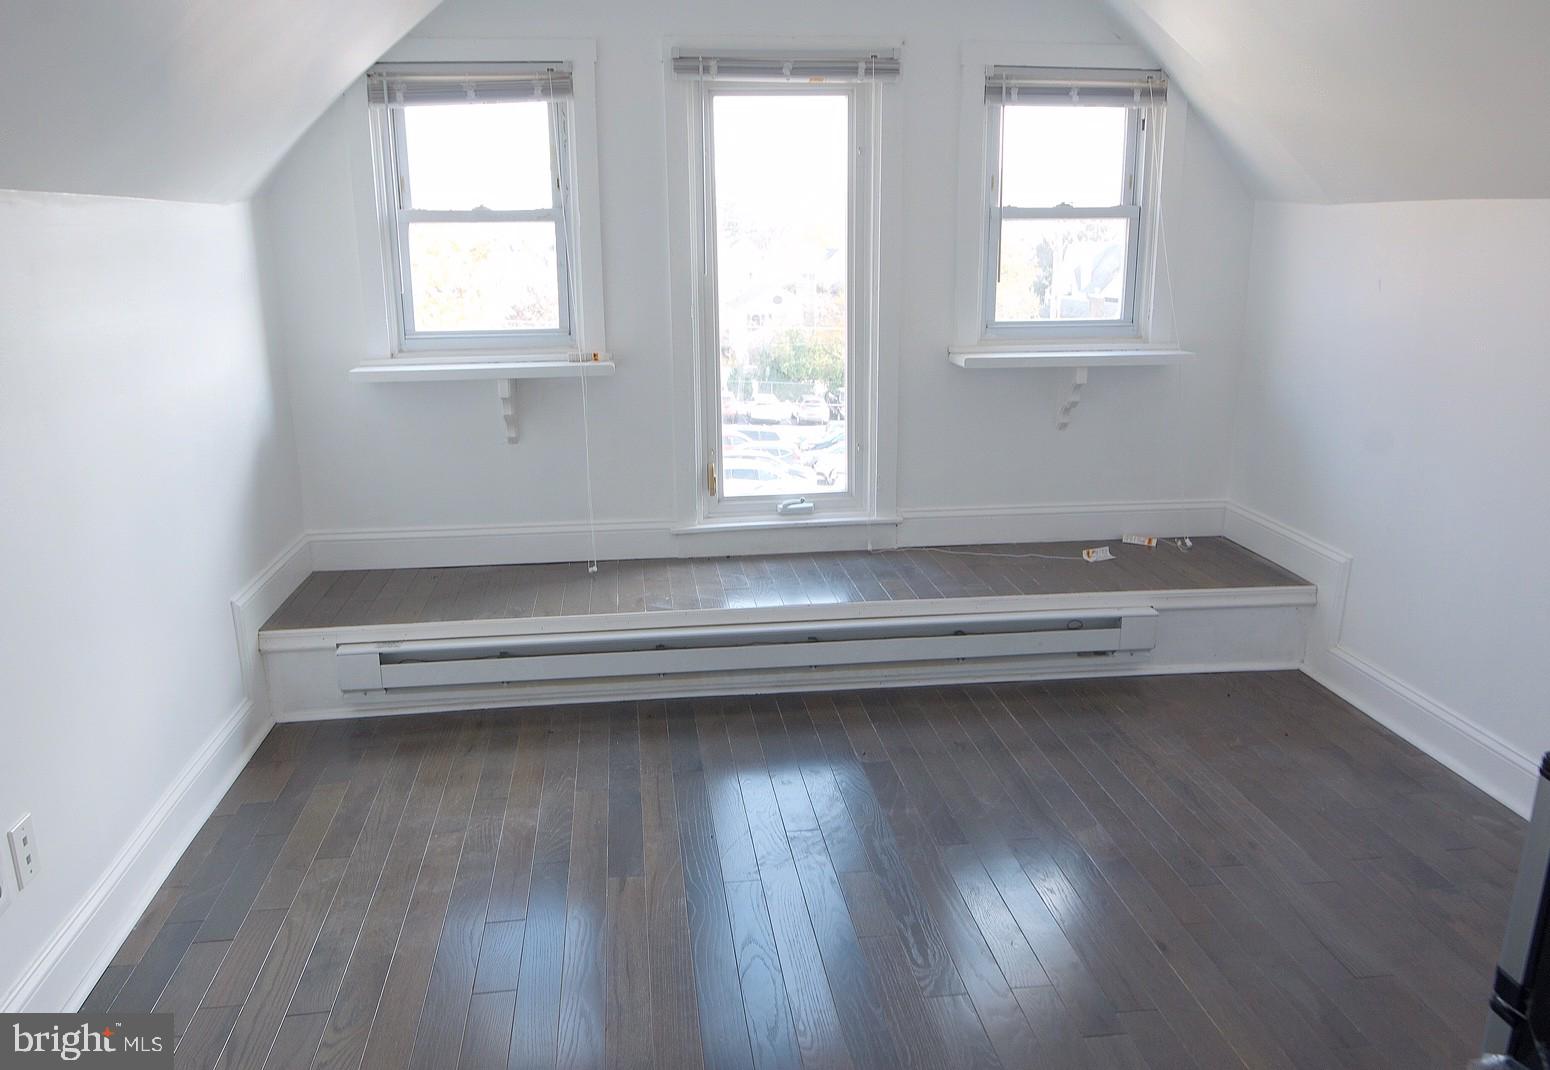 an empty room with wooden floor and a window